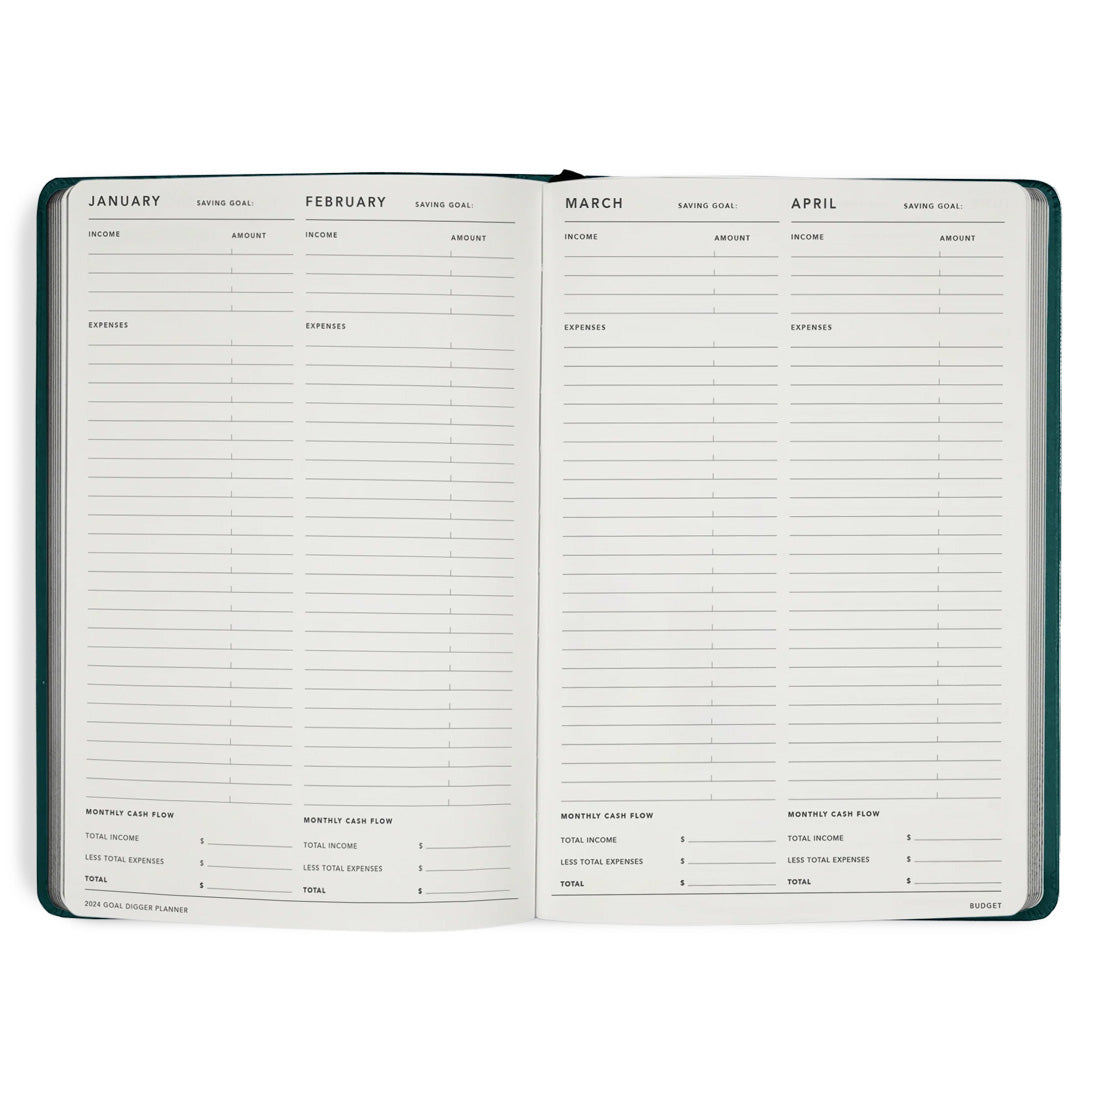 2024 TEAL GREEN GOAL DIGGER CLASSIC PLANNER